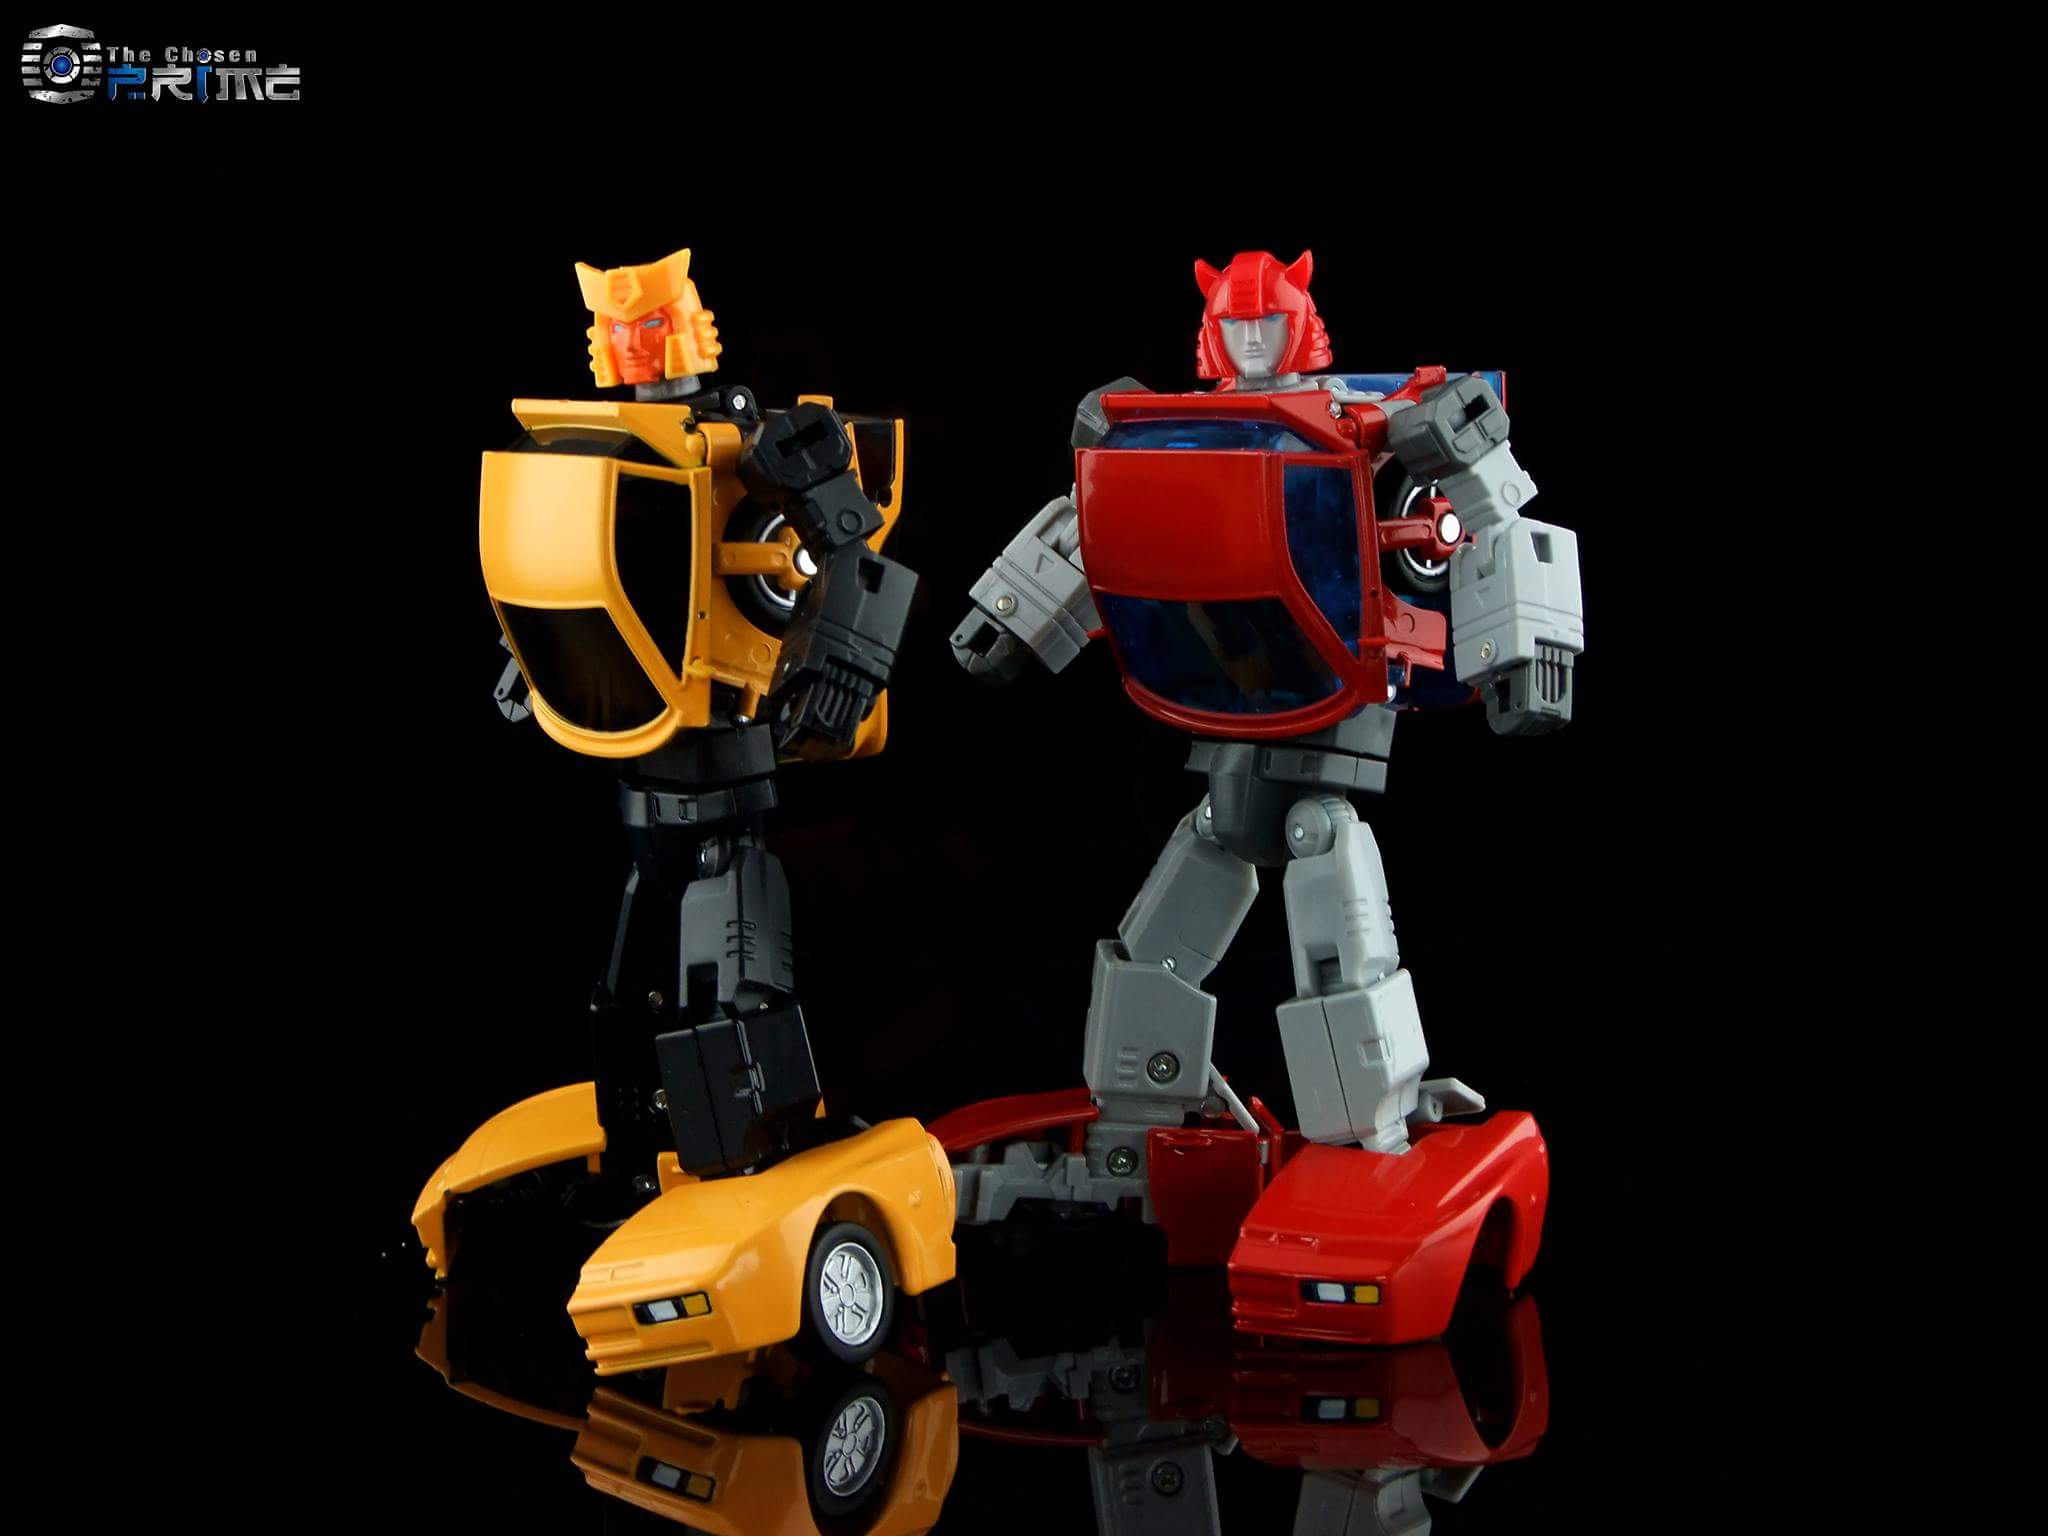 [ACE Collectables] Produit Tiers - Minibots MP - ACE-01 Tumbler (aka Cliffjumper/Matamore), ACE-02 Hiccups (aka Hubcap/Virevolto), ACE-03 Trident (aka Seaspray/Embruns) A9MUCpvG